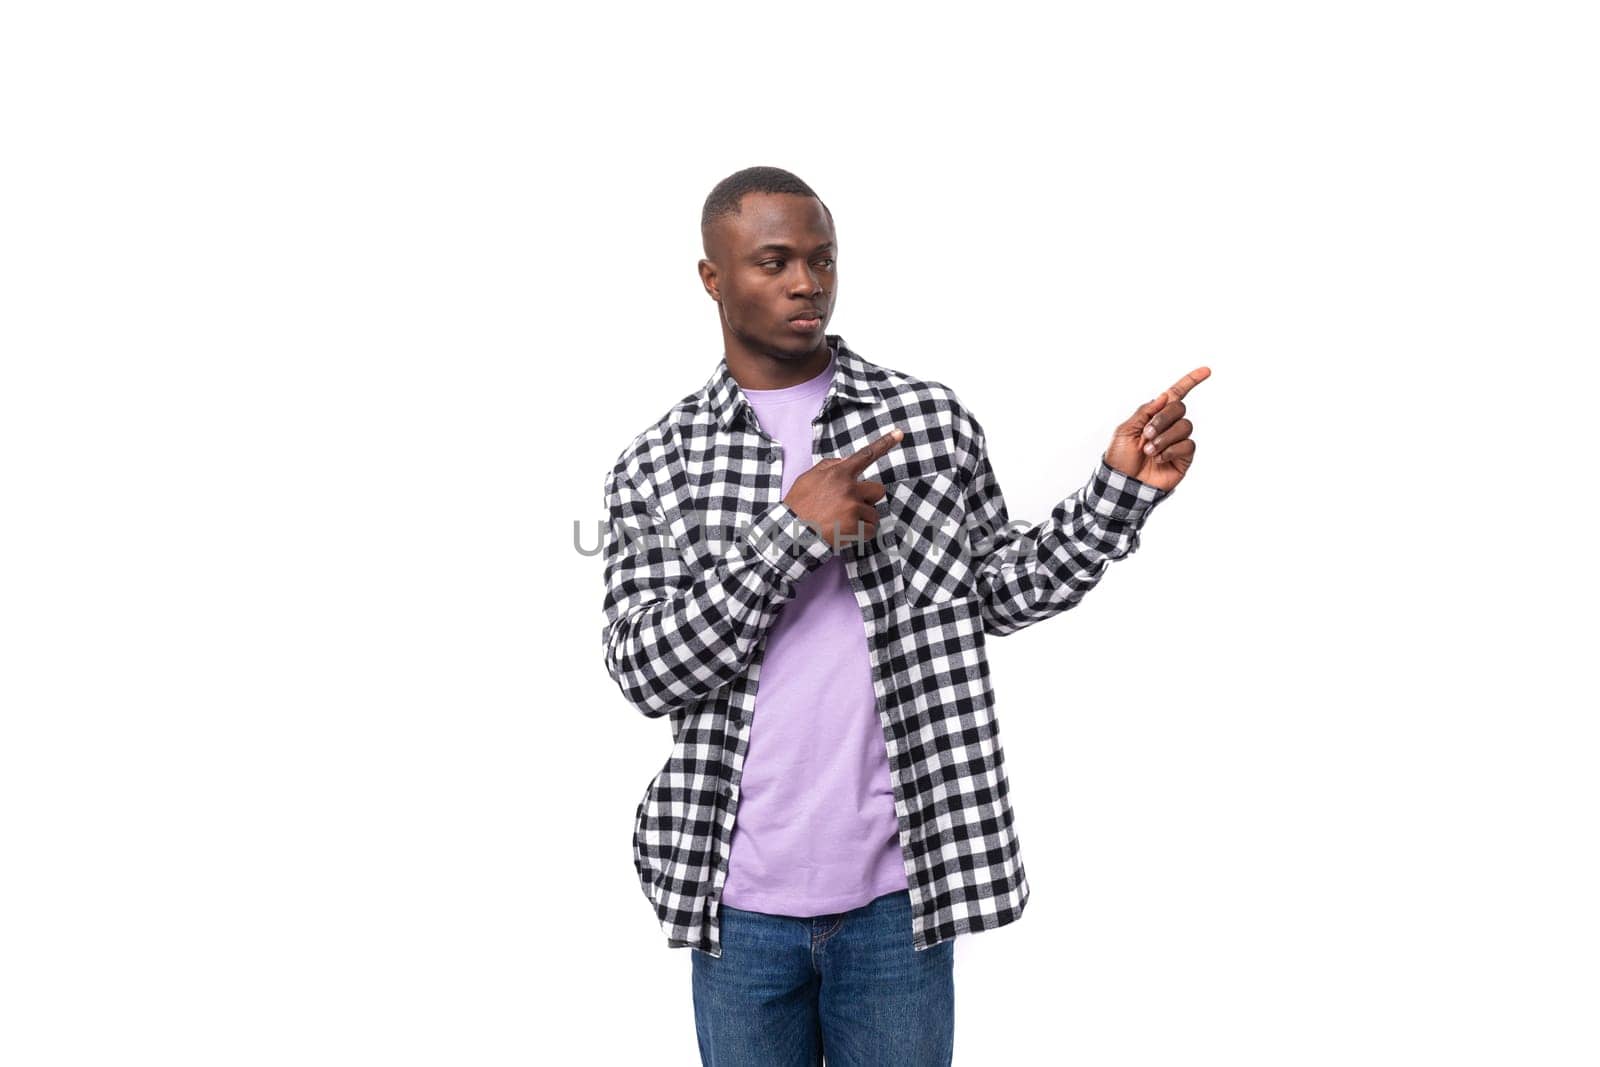 young smart african man dressed in a plaid shirt points a finger towards an advertisement on an isolated white background with copy space.